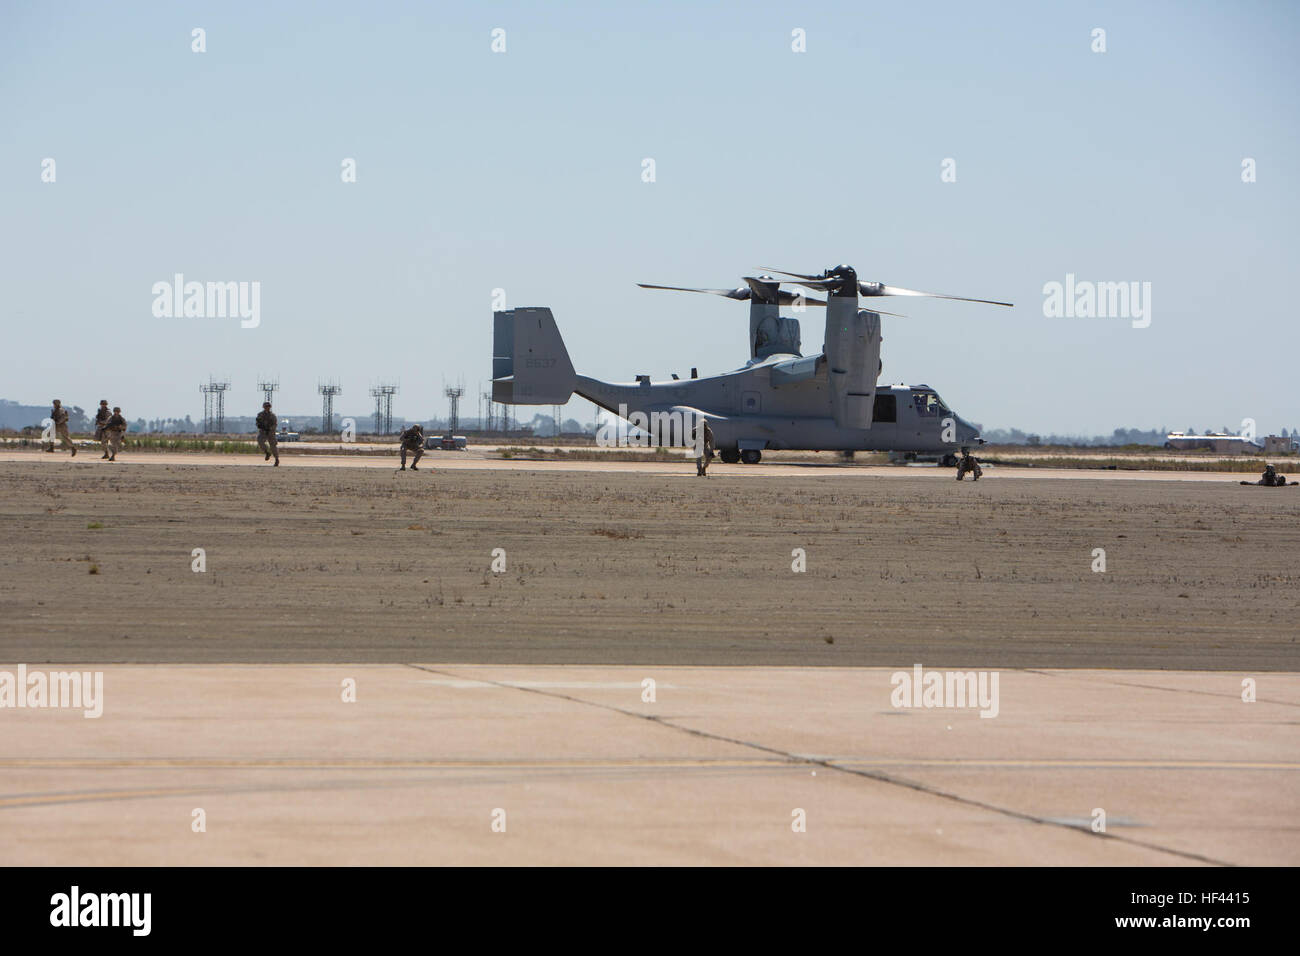 Marines with 3rd Battalion, 5th Marine Regiment, 1st Marine Division, exit from an MV-22 Osprey and post security to demonstrate the Marine Air Ground Task Force’s capabilities during the 2016 Marine Corps Air Station (MCAS) Miramar Air Show at MCAS Miramar, Calif., Sept. 23, 2016. The MCAS Miramar Air Show honors 100 years of the Marine Corps Reserves by showcasing aerial prowess of the Armed Forces and their appreciation of the civilian community’s support to the troops. (U.S. Marine Corps photo By Corporal Jessica Y. Lucio/Released) MCAS Miramar Air Show 160923-M-UX416-003 Stock Photo